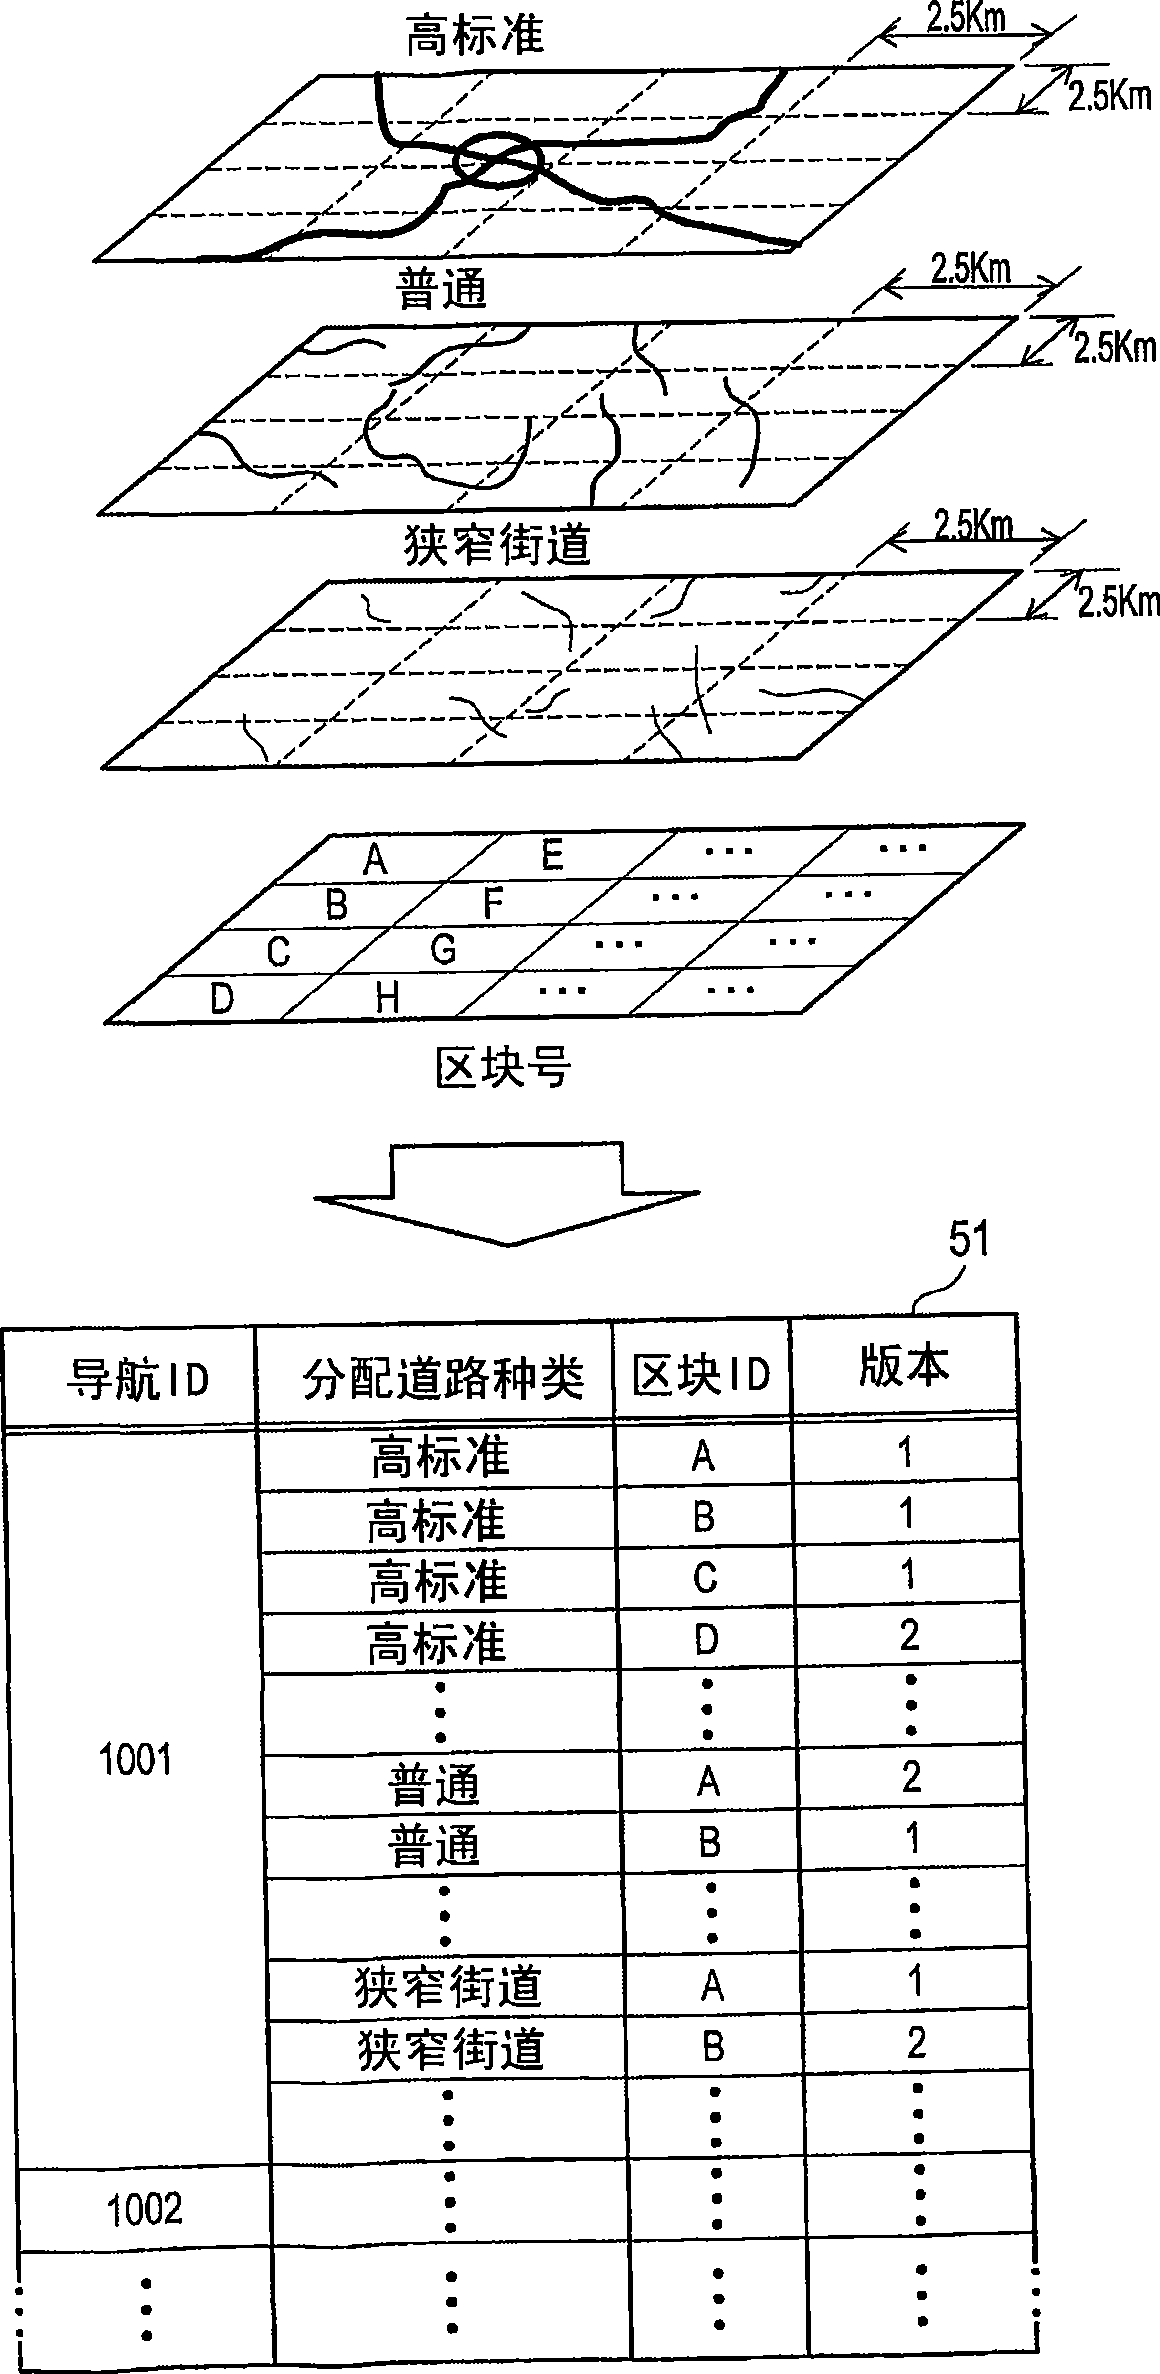 Map information distribution center and map information distribution method